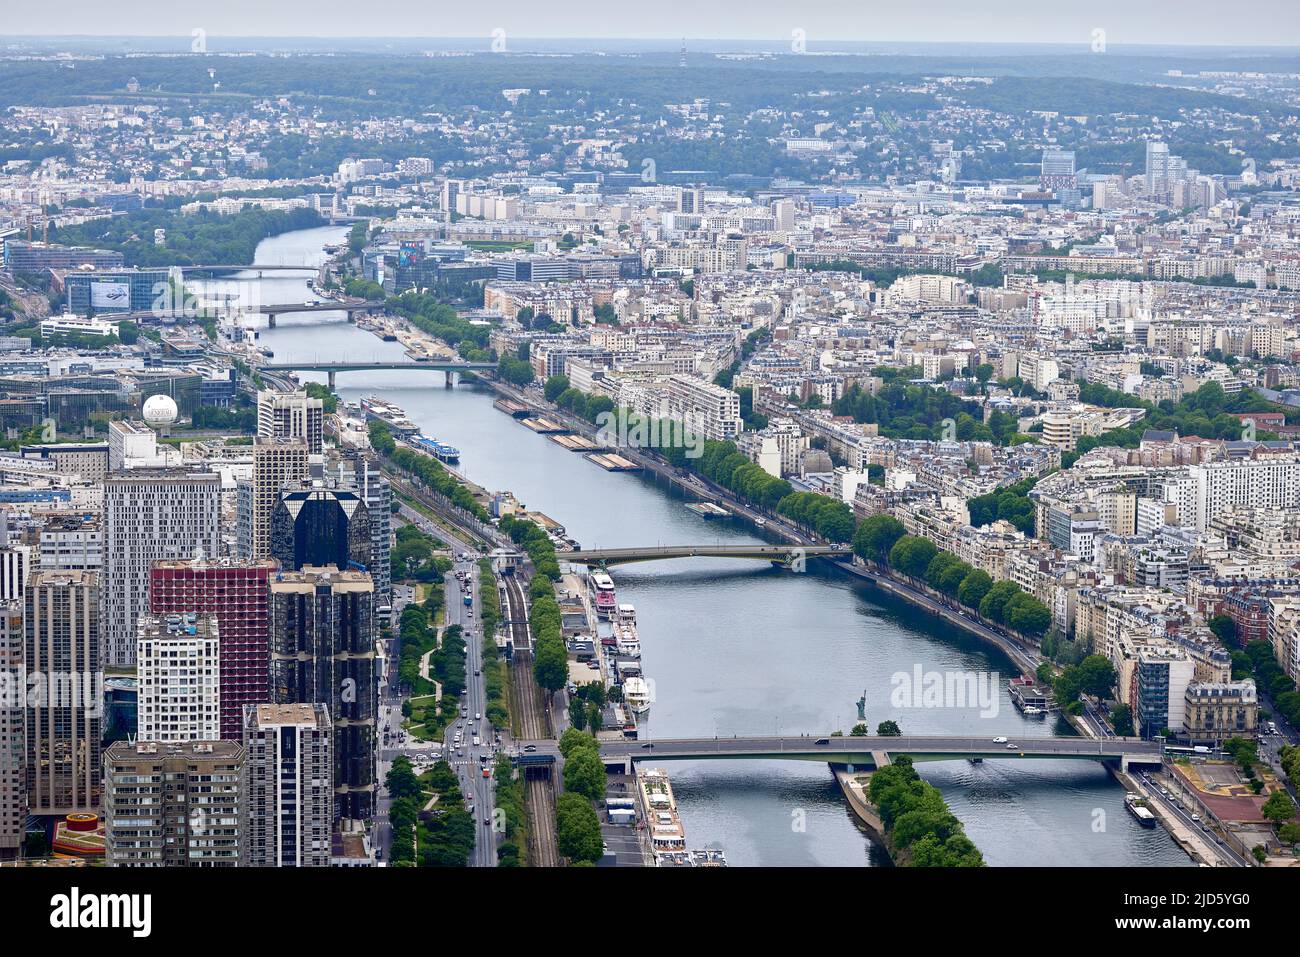 Aerial view of Paris from top of the Eiffel Tower Stock Photo